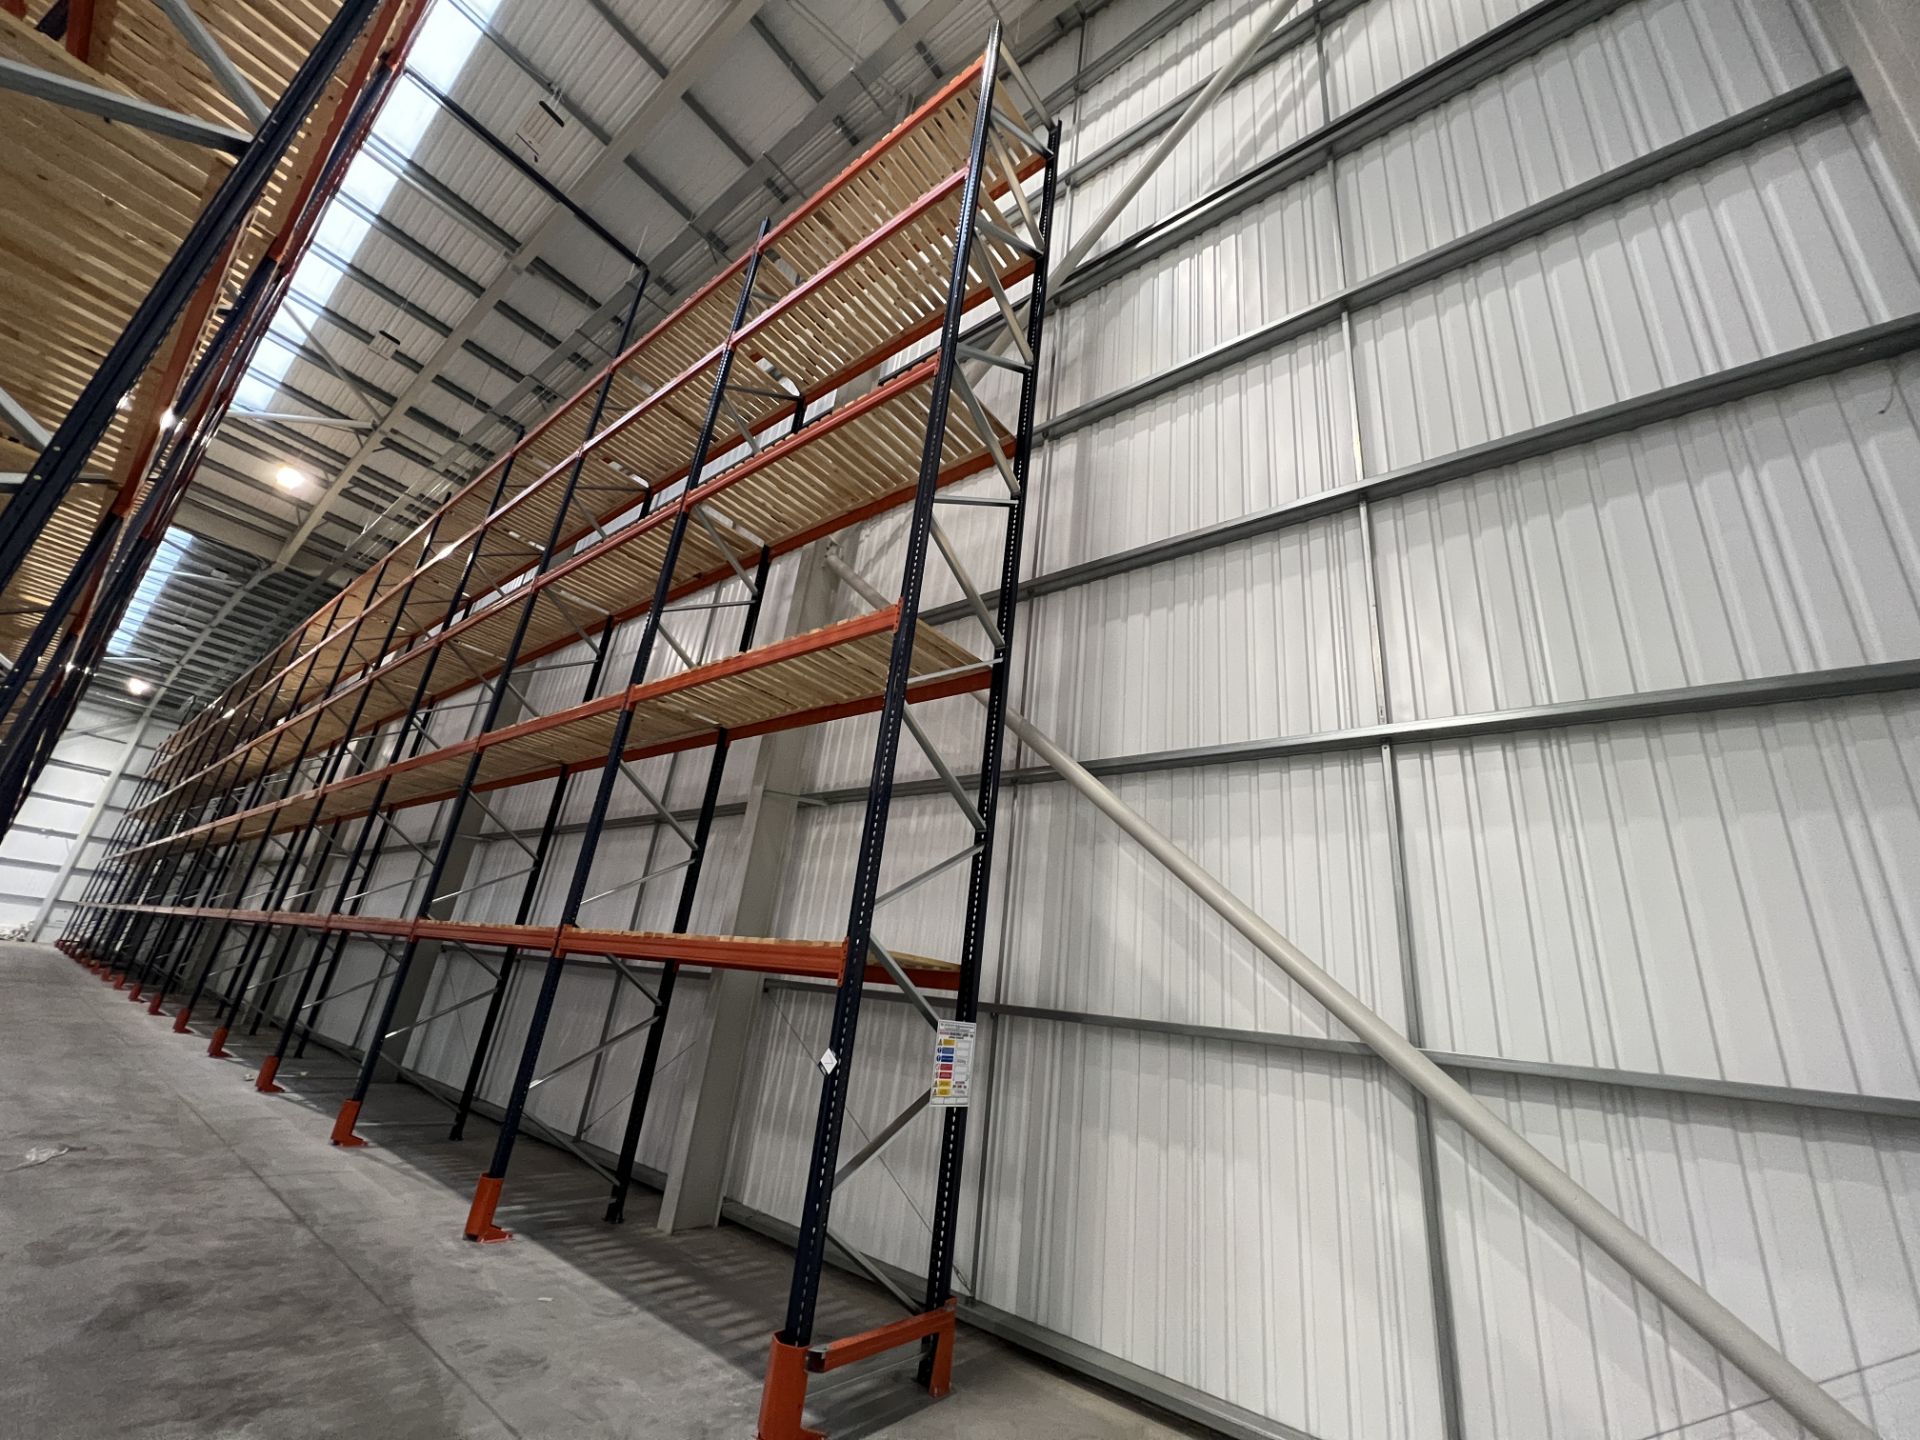 Mecalux M-22P high bay boltless pallet racking (2021), a 53 metre single run with 16 bays, to - Image 13 of 17